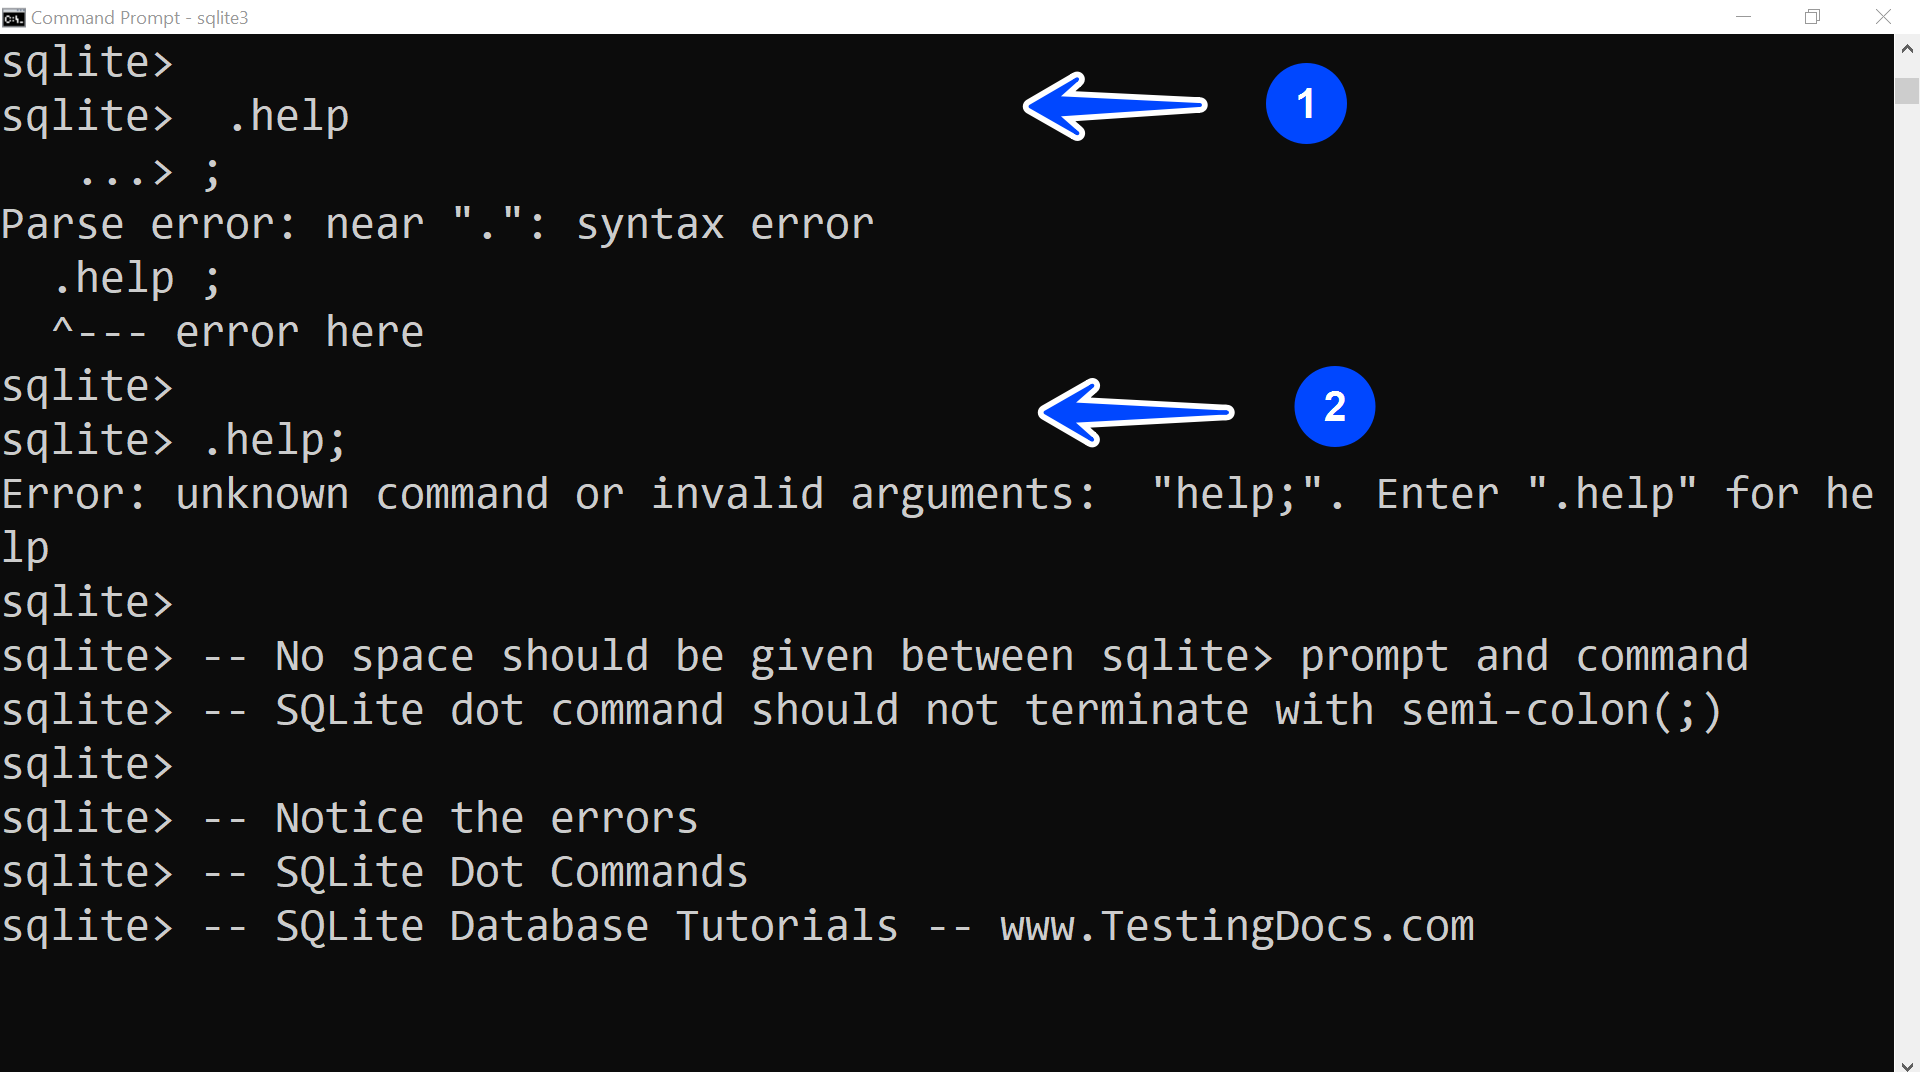 SQLite Dot Commands Invalid Syntax